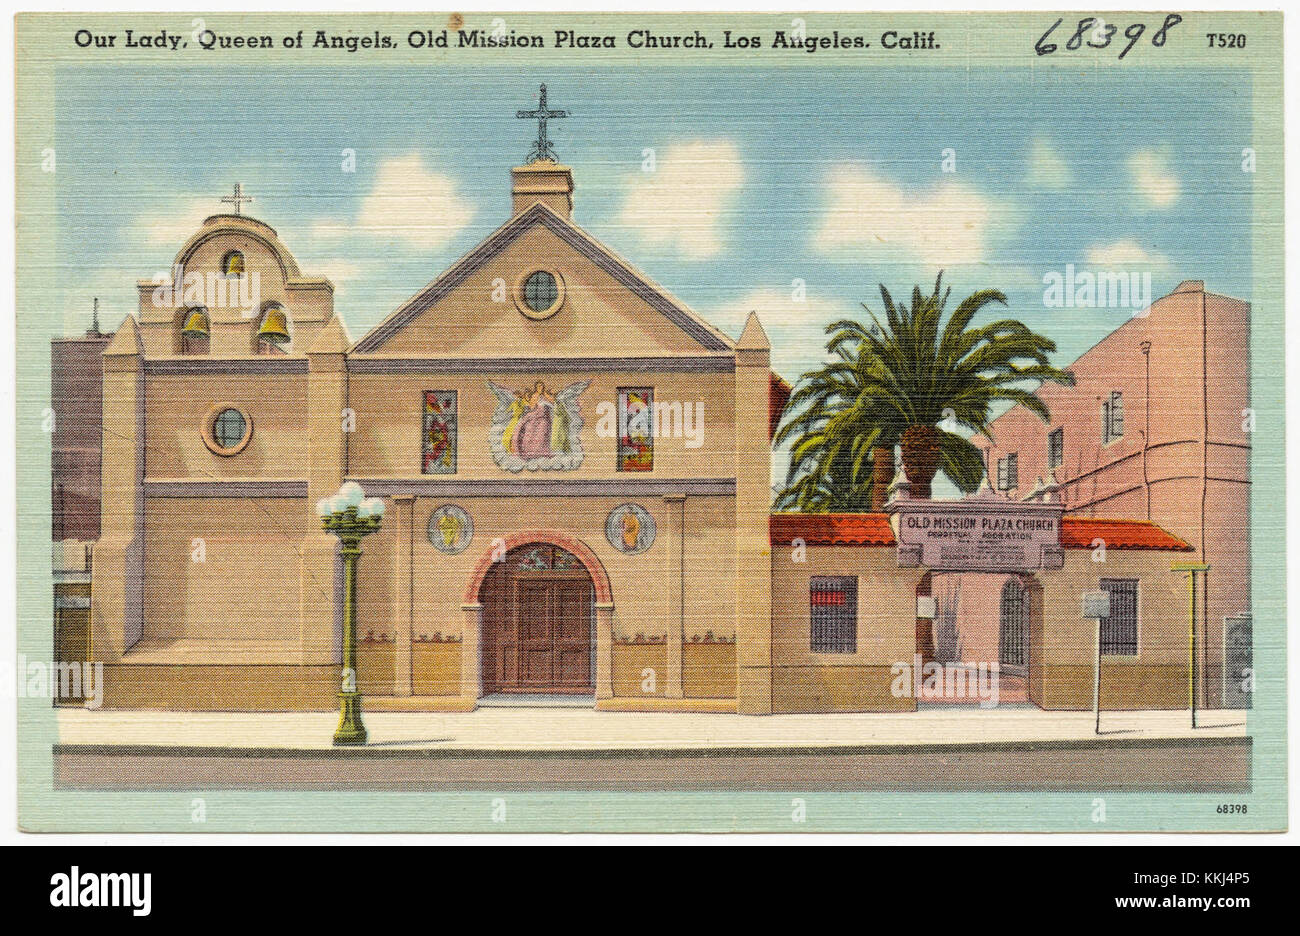 Our Lady, Queen of Angels, Old Mission Plaza Church, Los Angeles, Calif (68398) Stockfoto